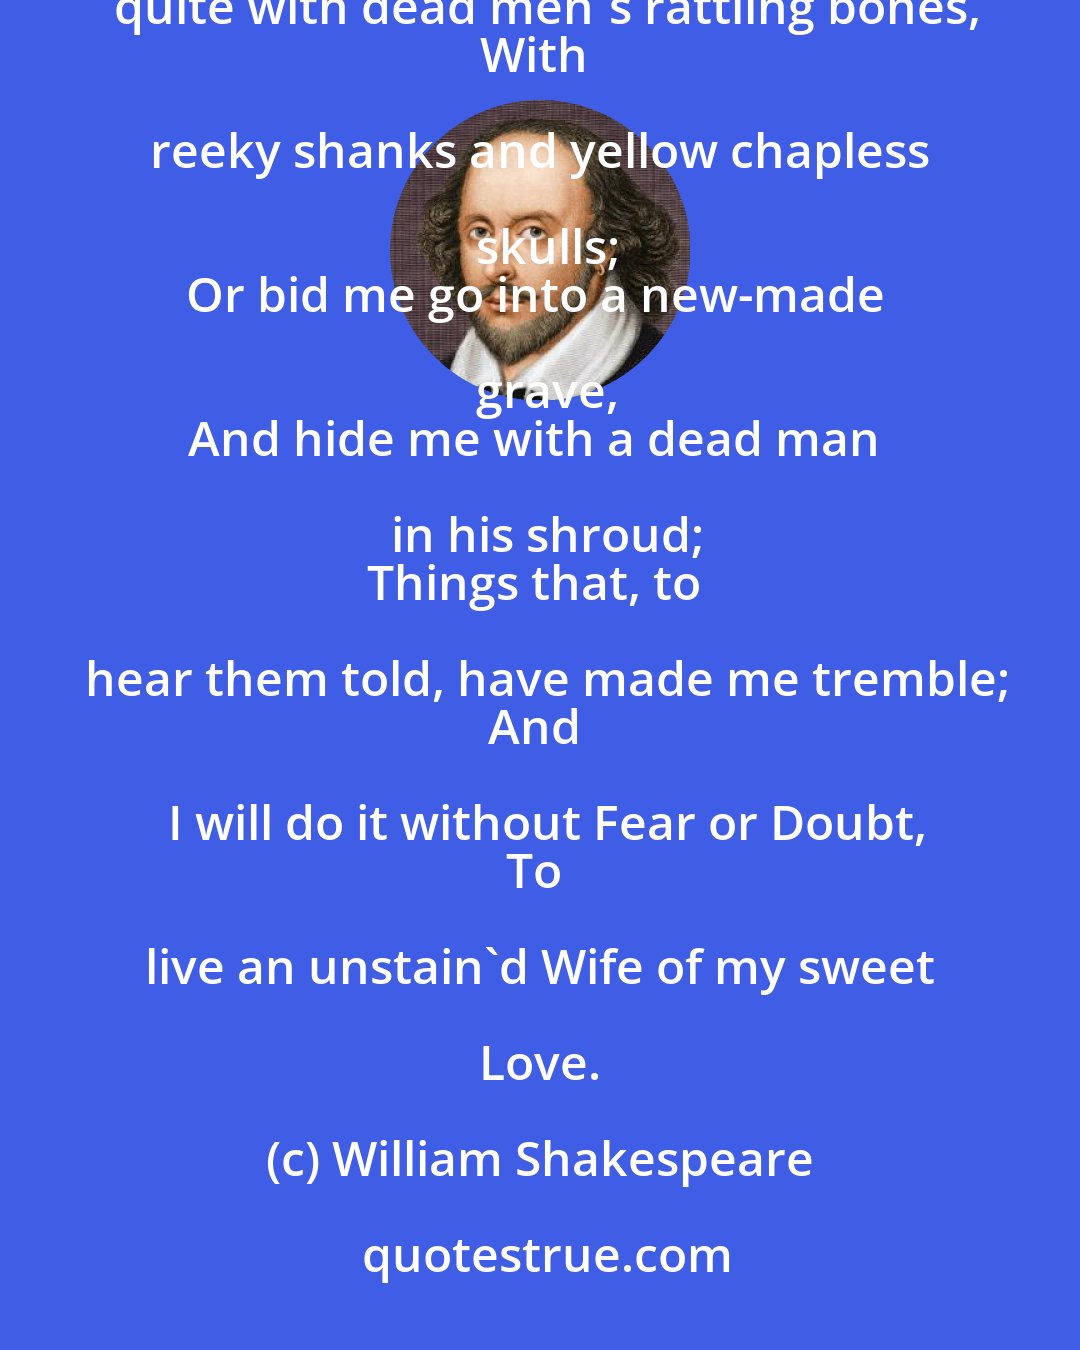 William Shakespeare: Chain me with roaring bears;
Or shut me nightly in a charnel-house,
O'er-covered quite with dead men's rattling bones,
With reeky shanks and yellow chapless skulls;
Or bid me go into a new-made grave,
And hide me with a dead man in his shroud;
Things that, to hear them told, have made me tremble;
And I will do it without Fear or Doubt,
To live an unstain'd Wife of my sweet Love.